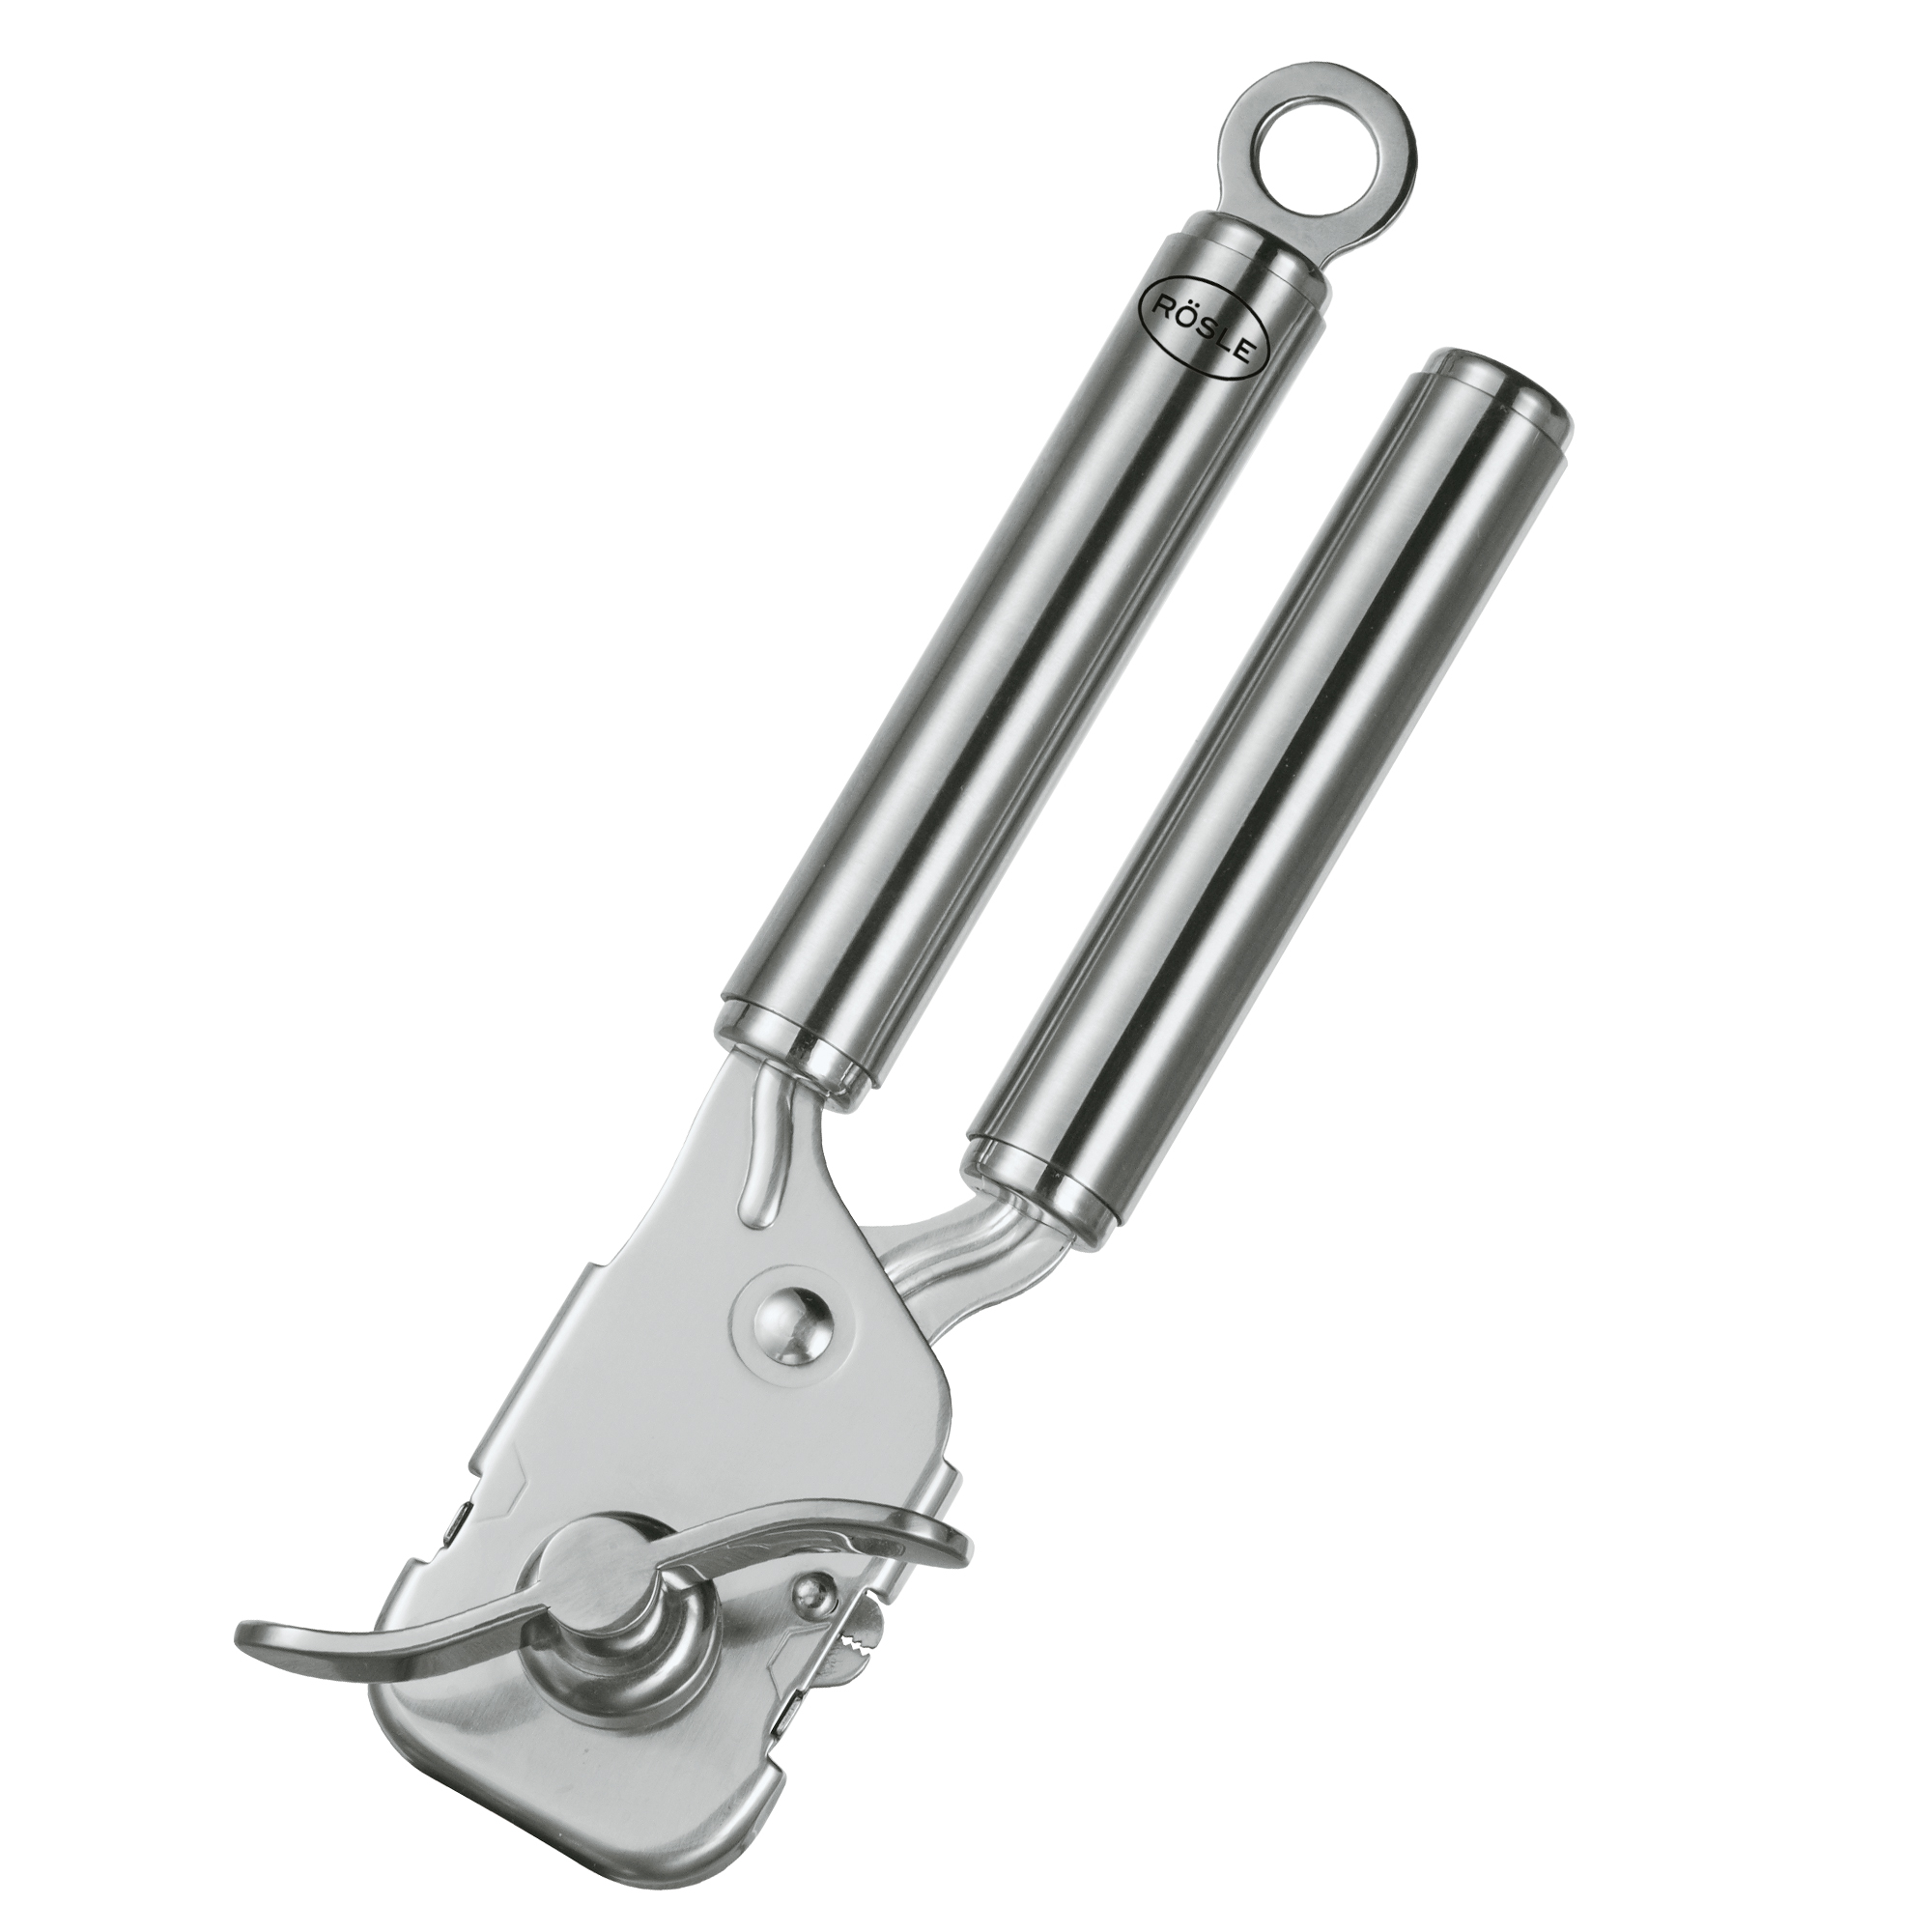 Can Opener with pliers grip